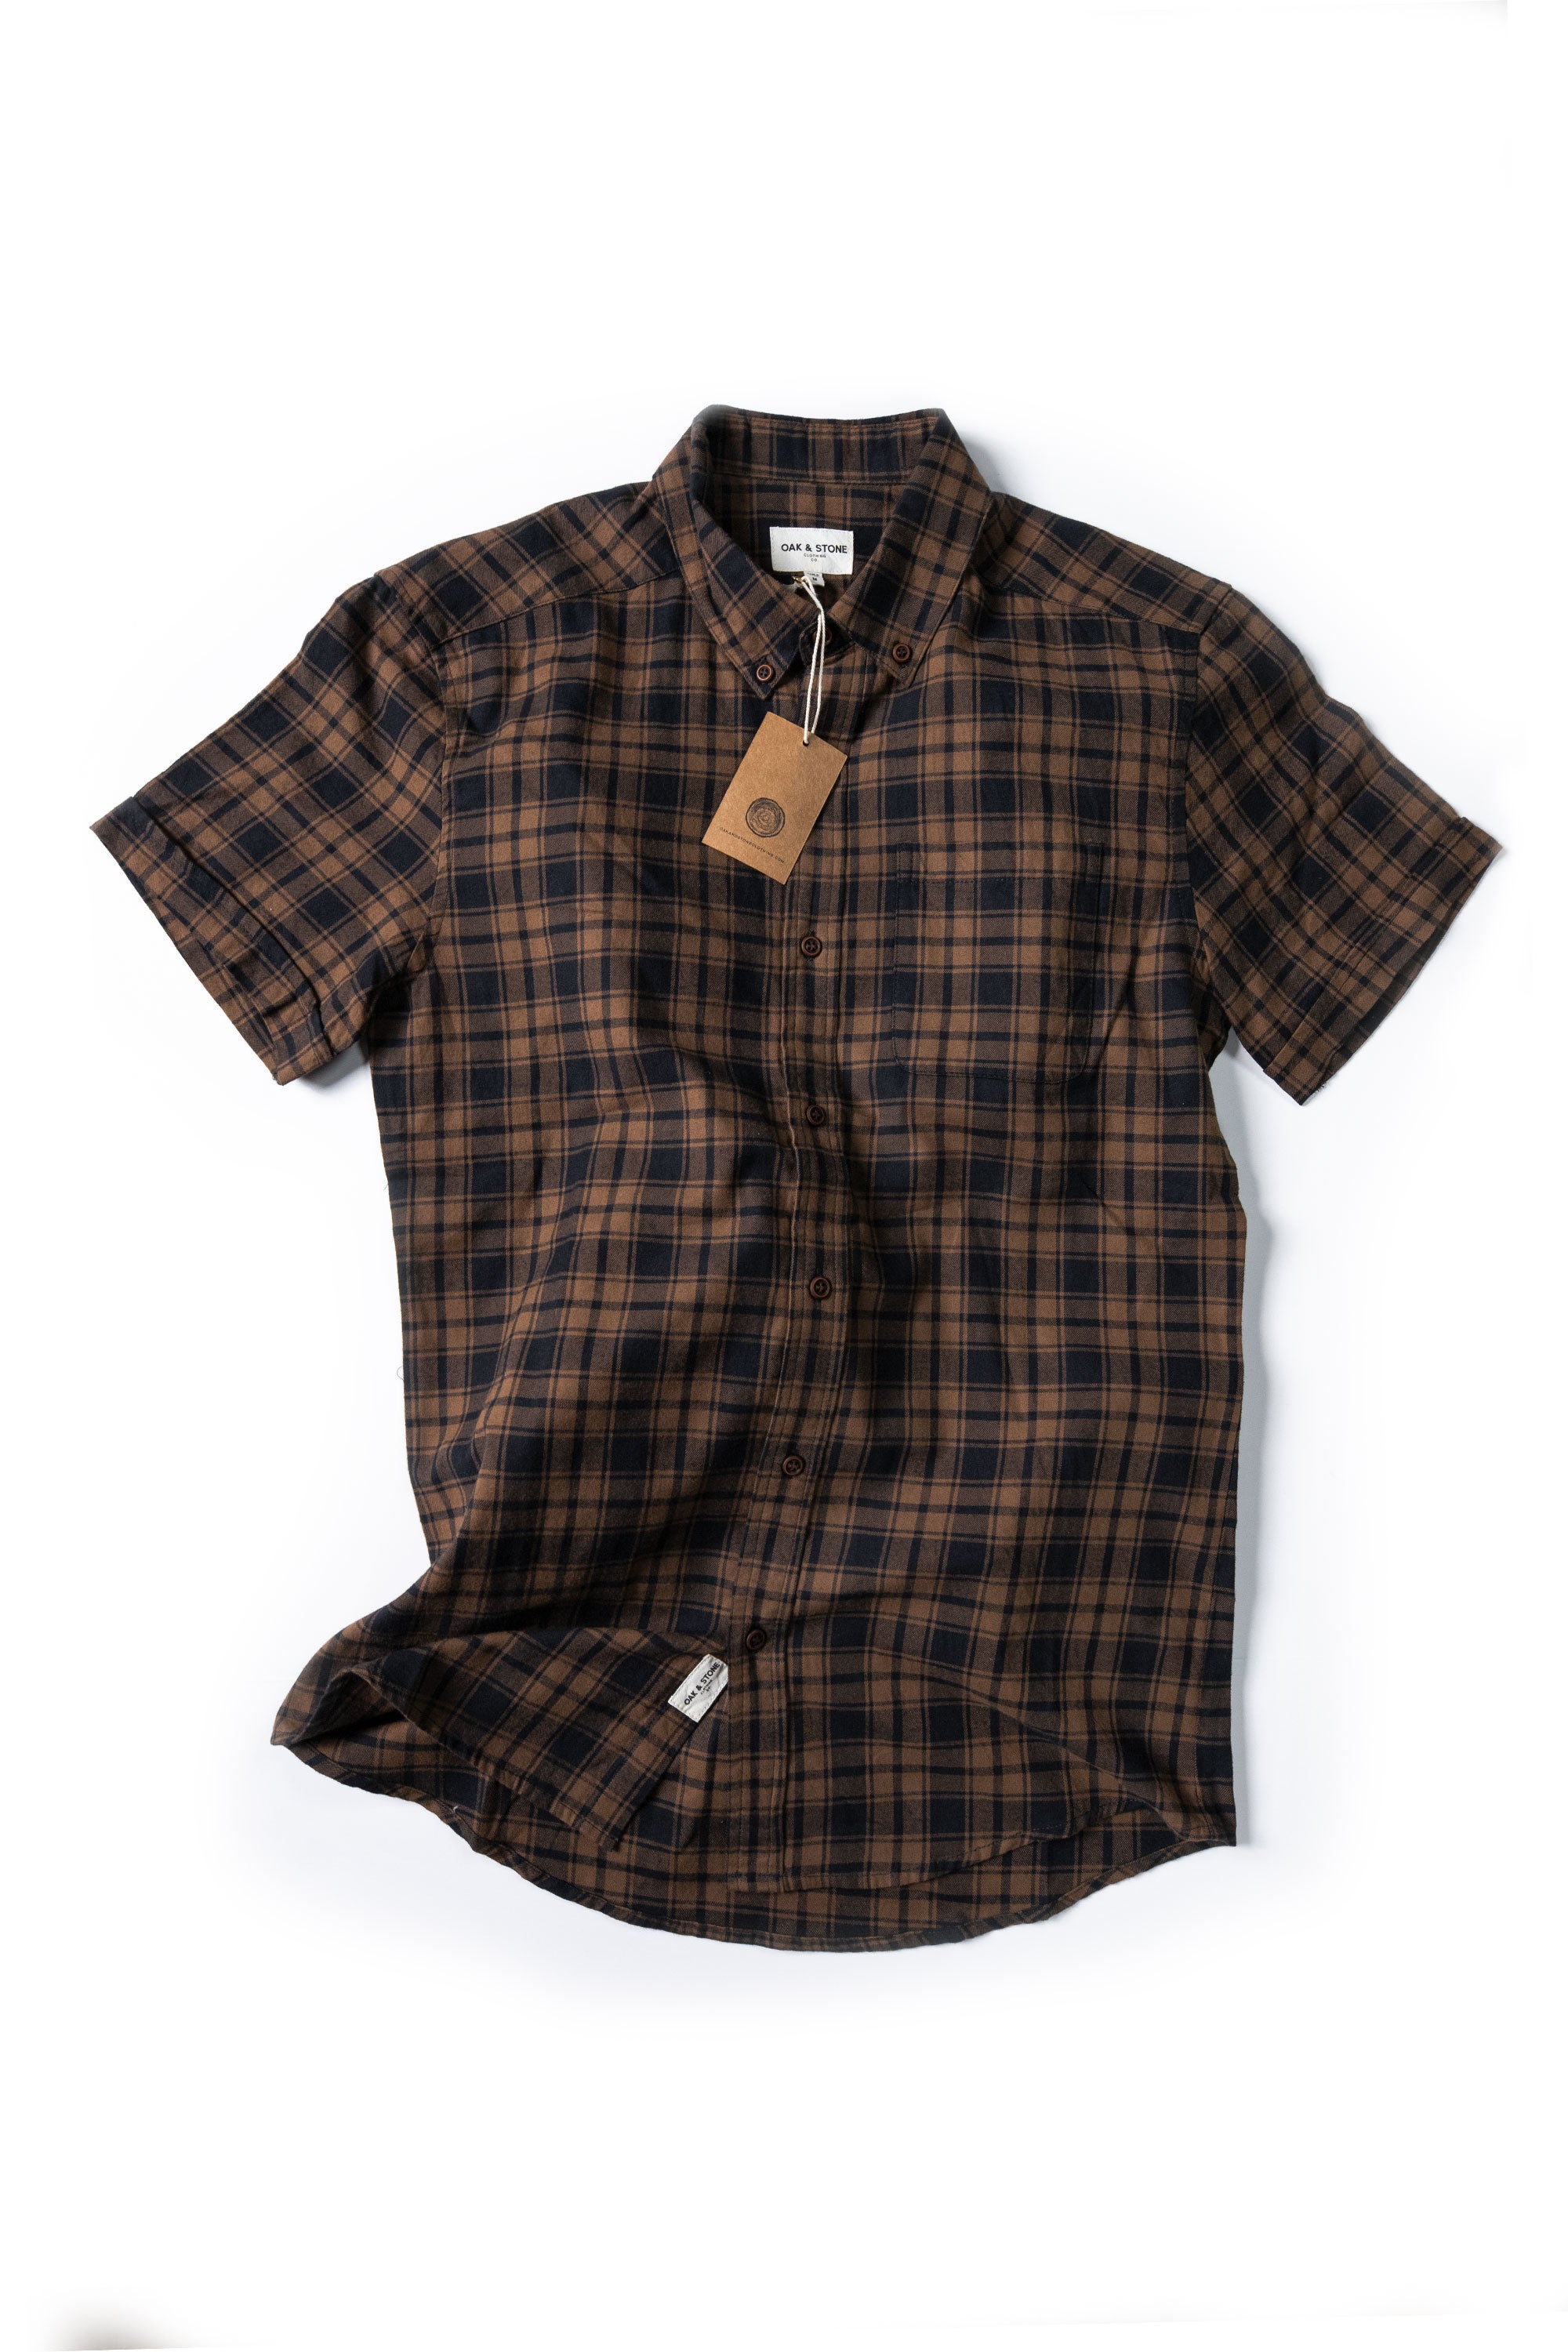 The Essential S/S - Brown - Oak & Stone Clothing Co.